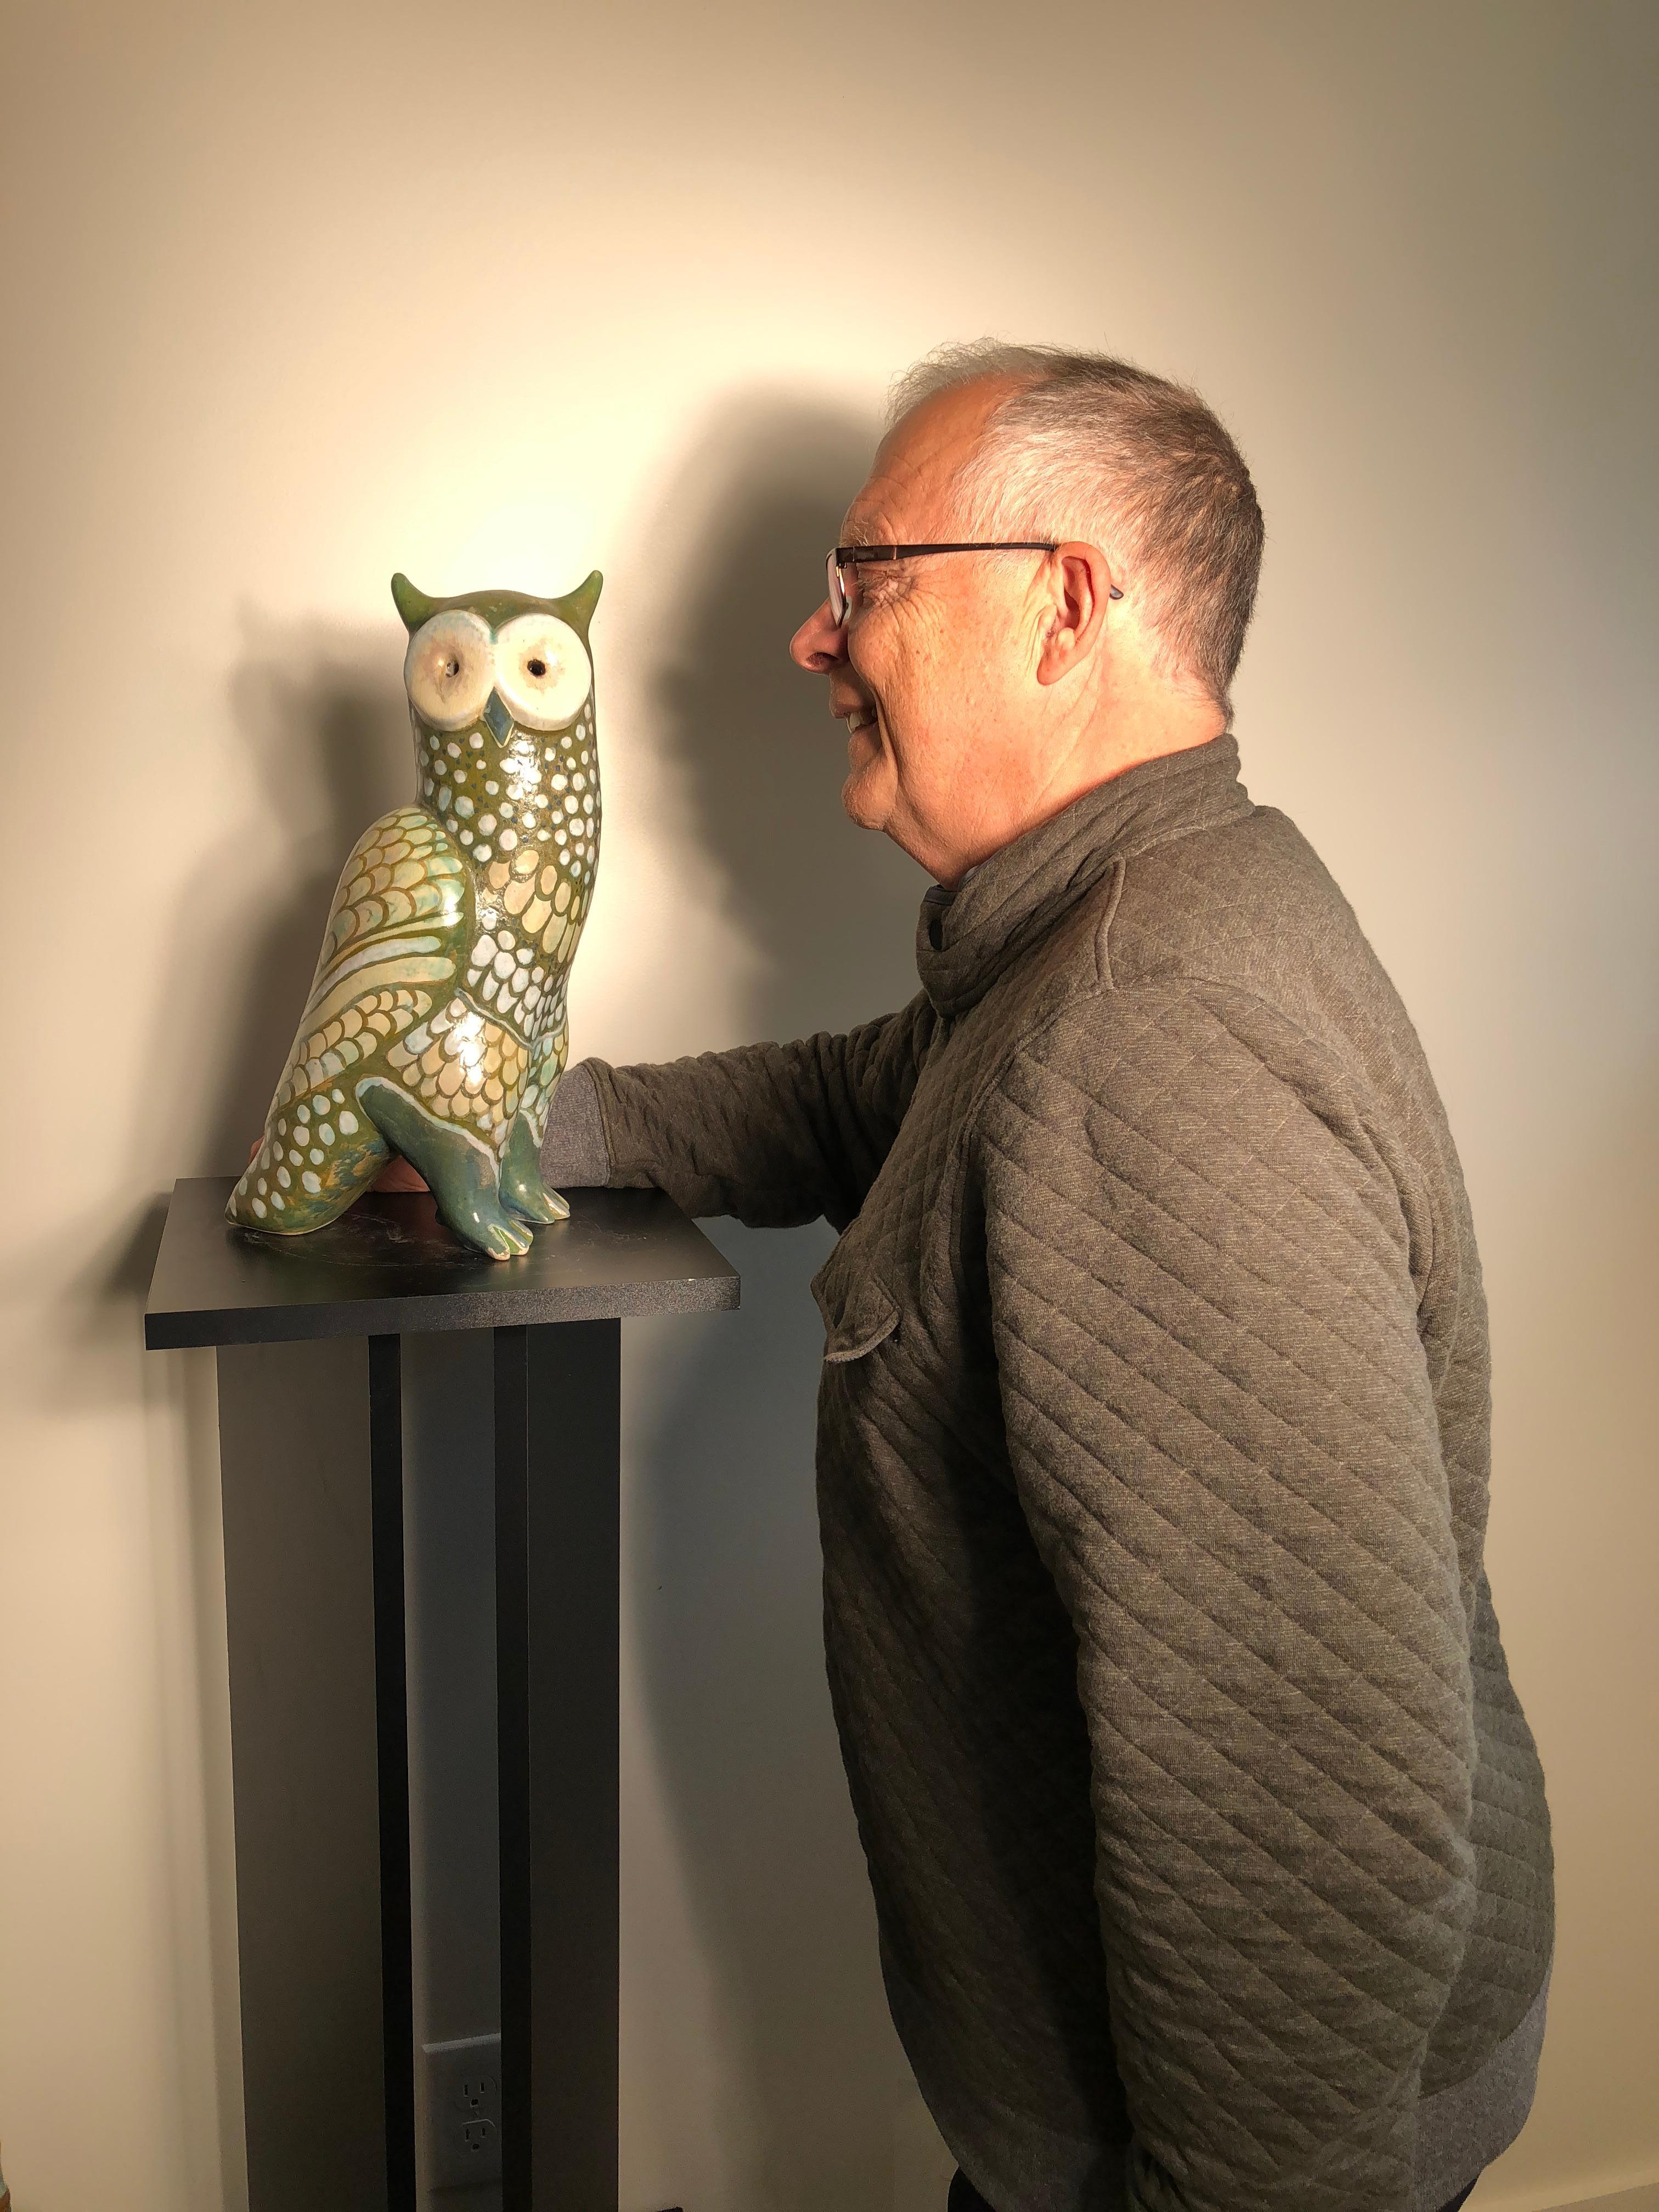 Big Bird

A fine green spotted owl master work sculpture designed and hand-painted by Eva Fritz-Lindner (1933-2017).

This is a tall, creative handmade, hand painted and hand glazed sculpture of a spotted owl. It was designed and hand painted by the